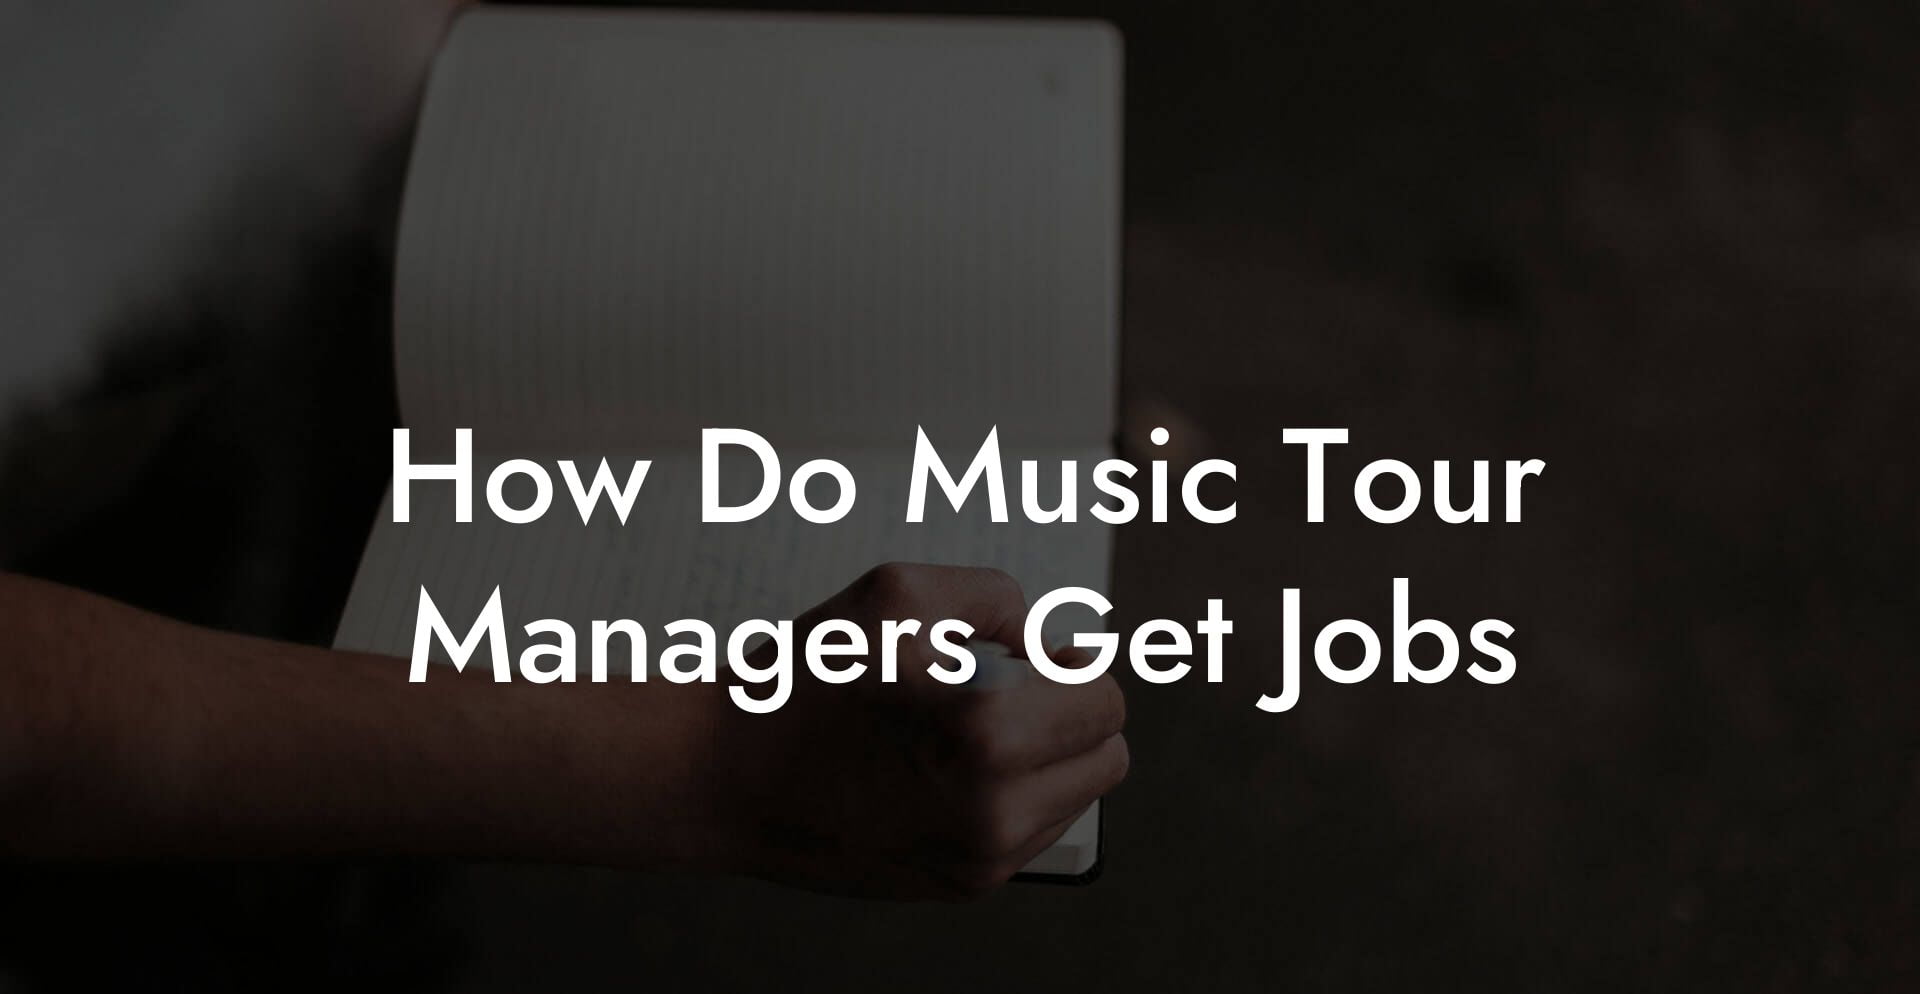 How Do Music Tour Managers Get Jobs